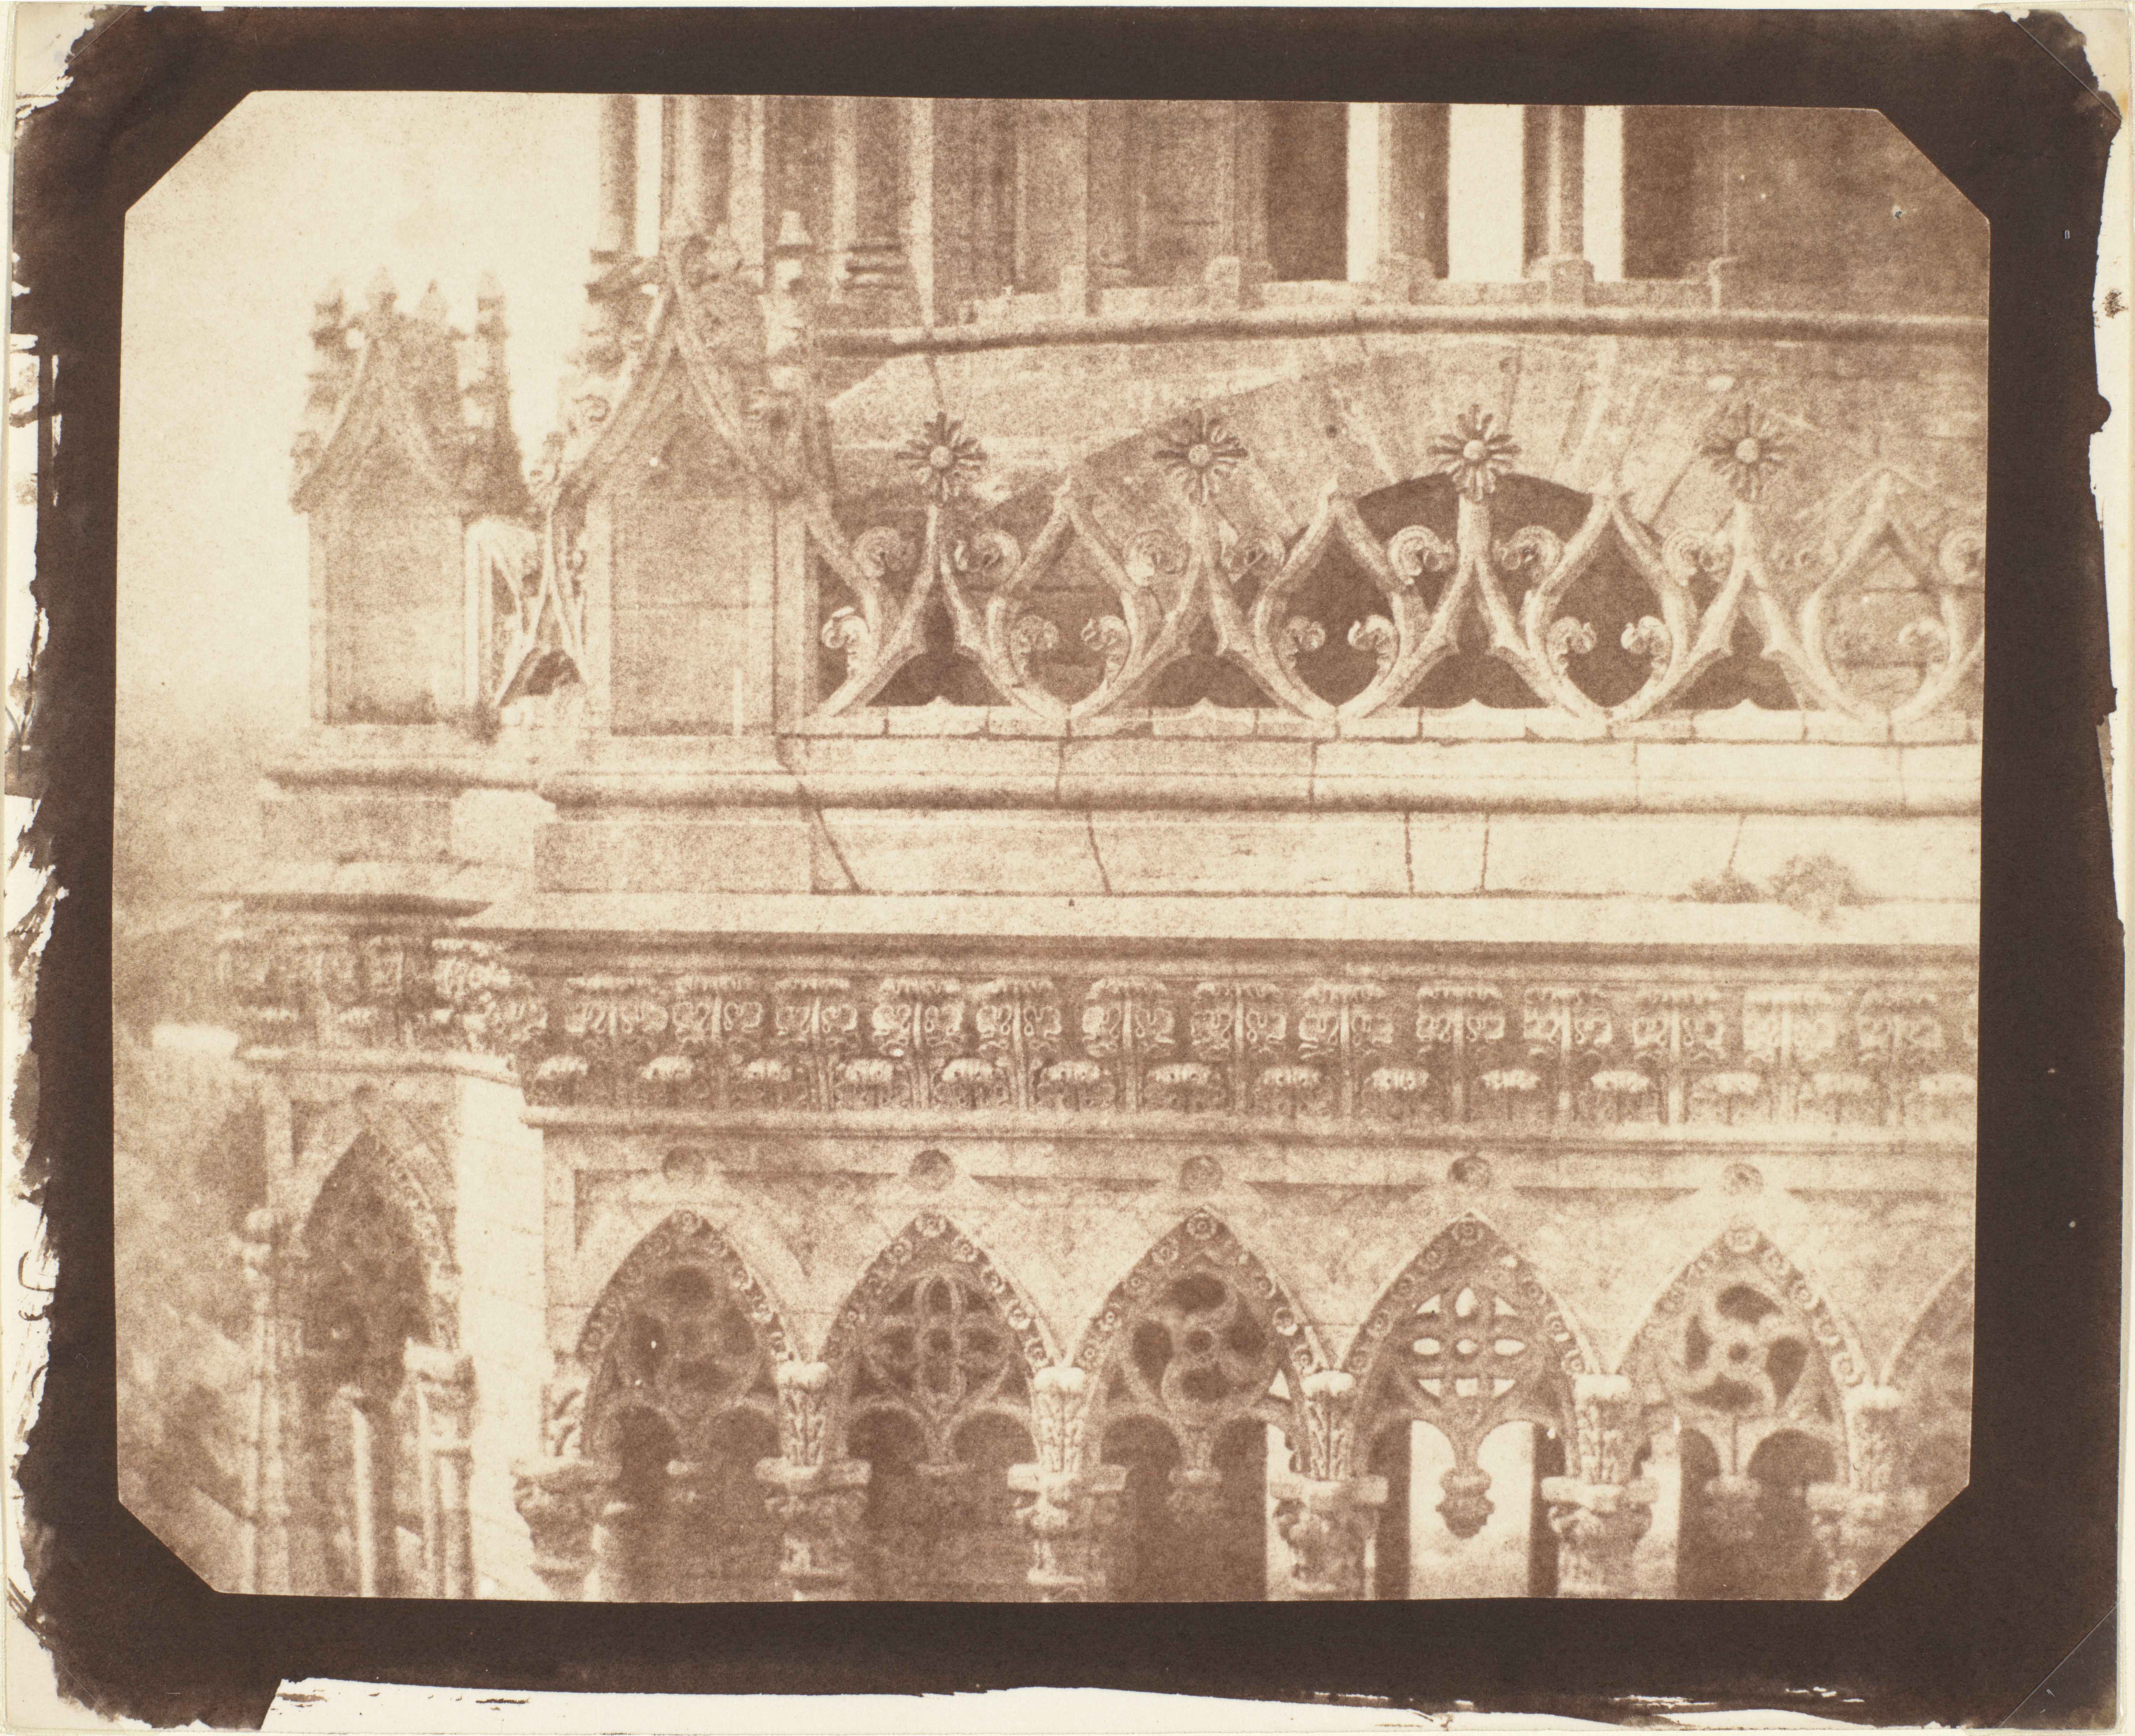 William Henry Fox Talbot (British, 1800–1877), Orléans Cathedral, 1843, salted-paper print from calotype negative. Bank of America Collection